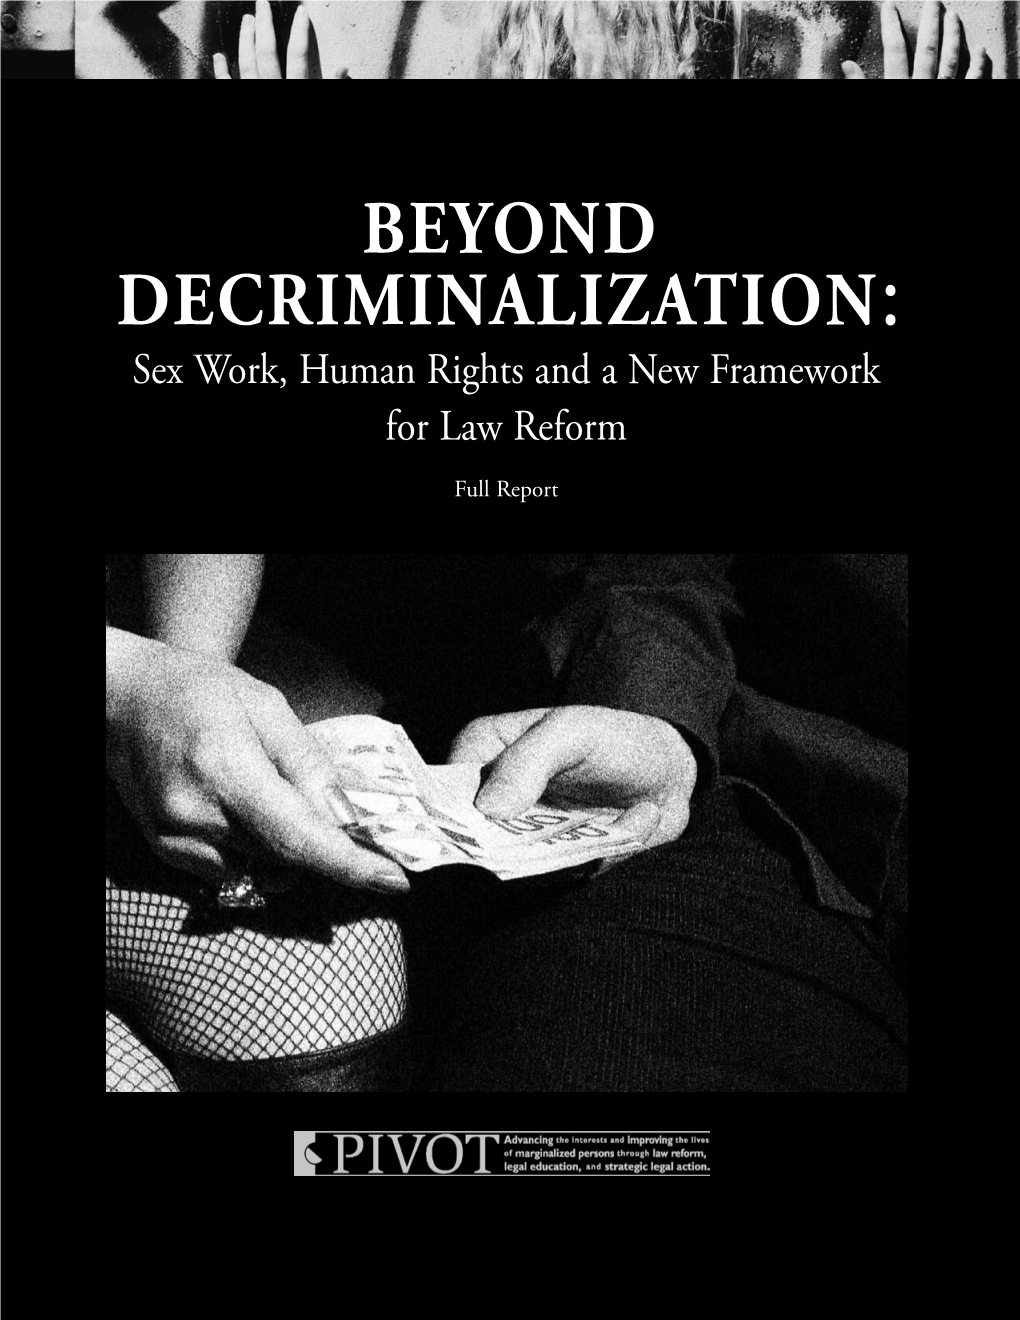 BEYOND DECRIMINALIZATION: Sex Work, Human Rights and a New Framework for Law Reform